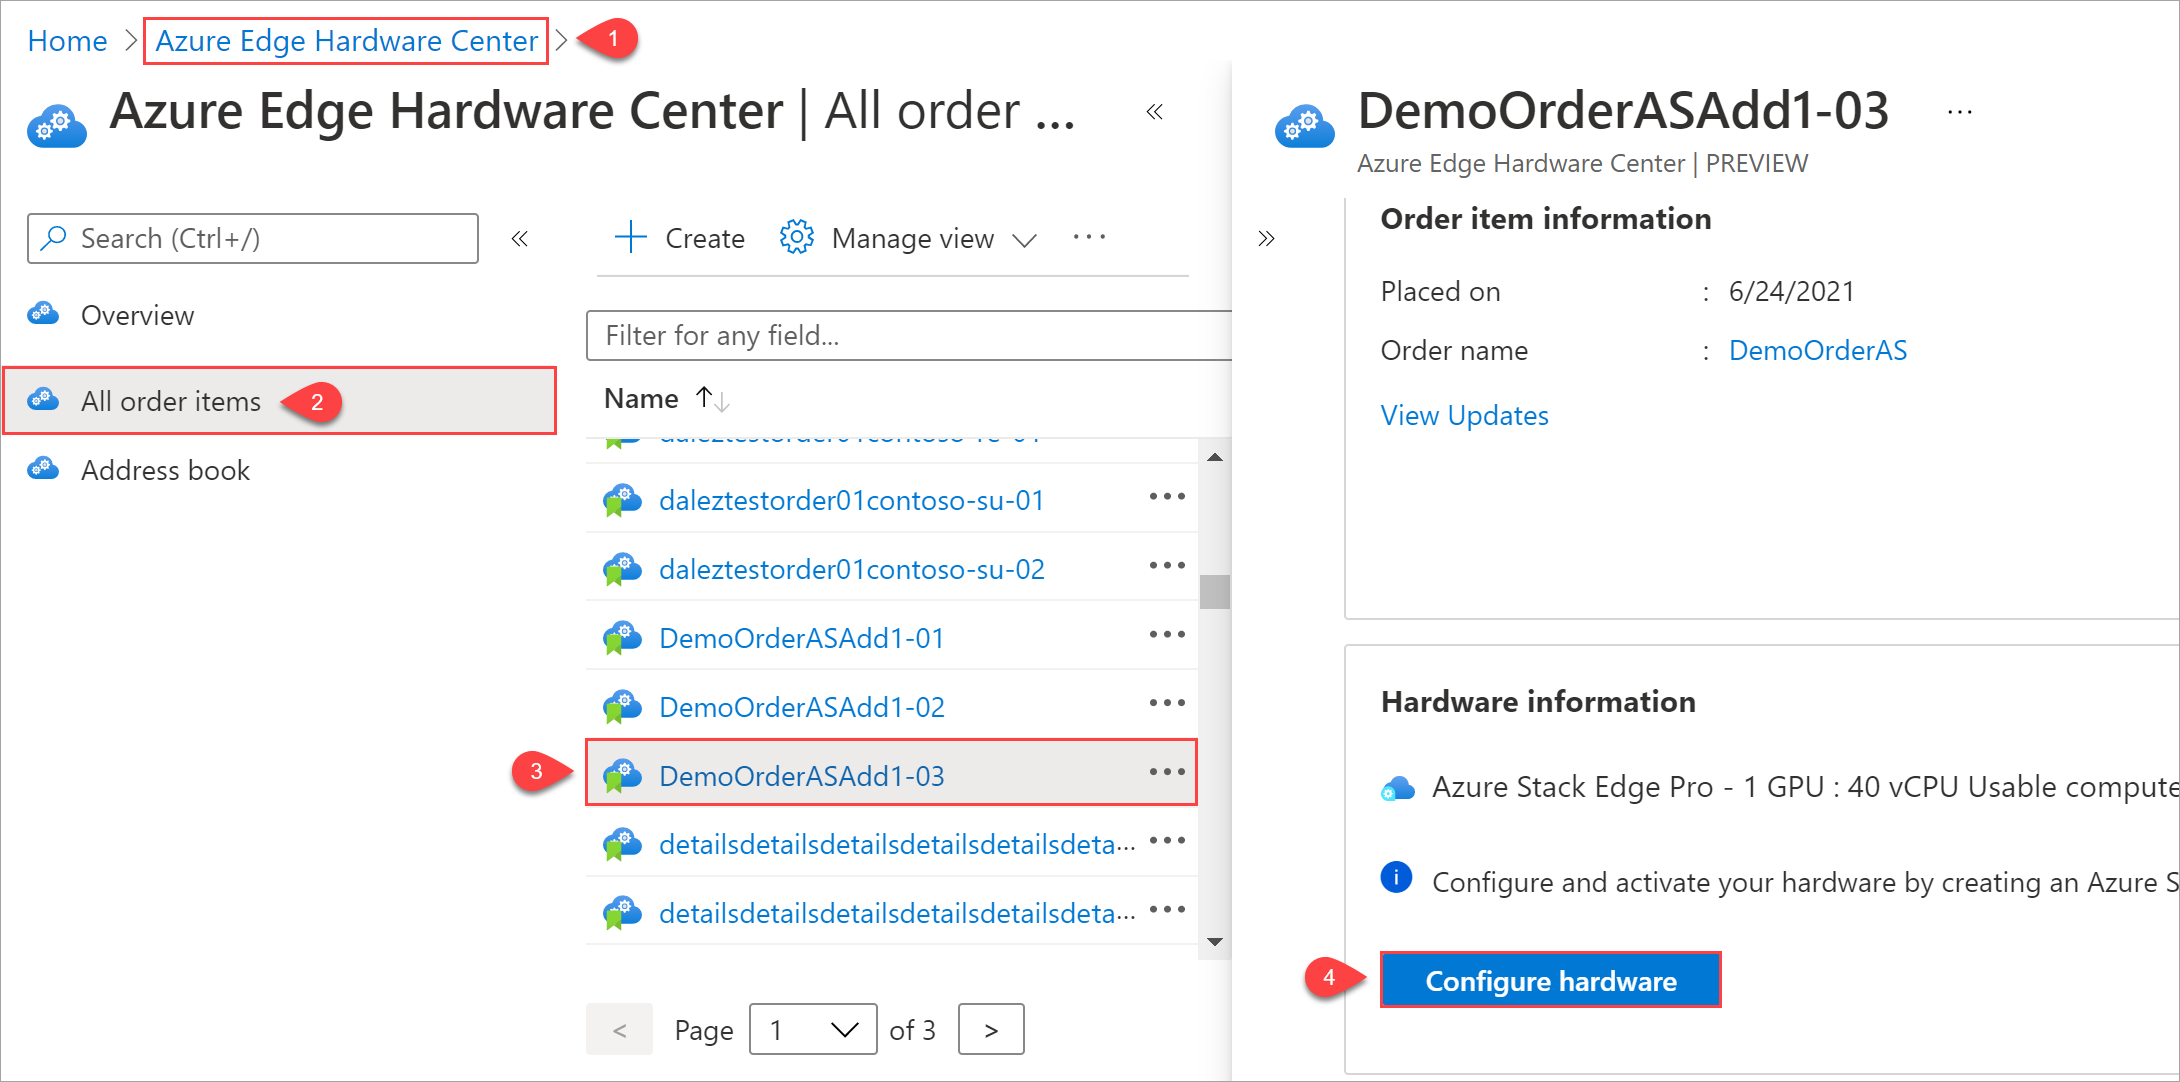 Illustration showing 4 steps to start management resource creation from an order item in the Azure Edge Hardware Center.